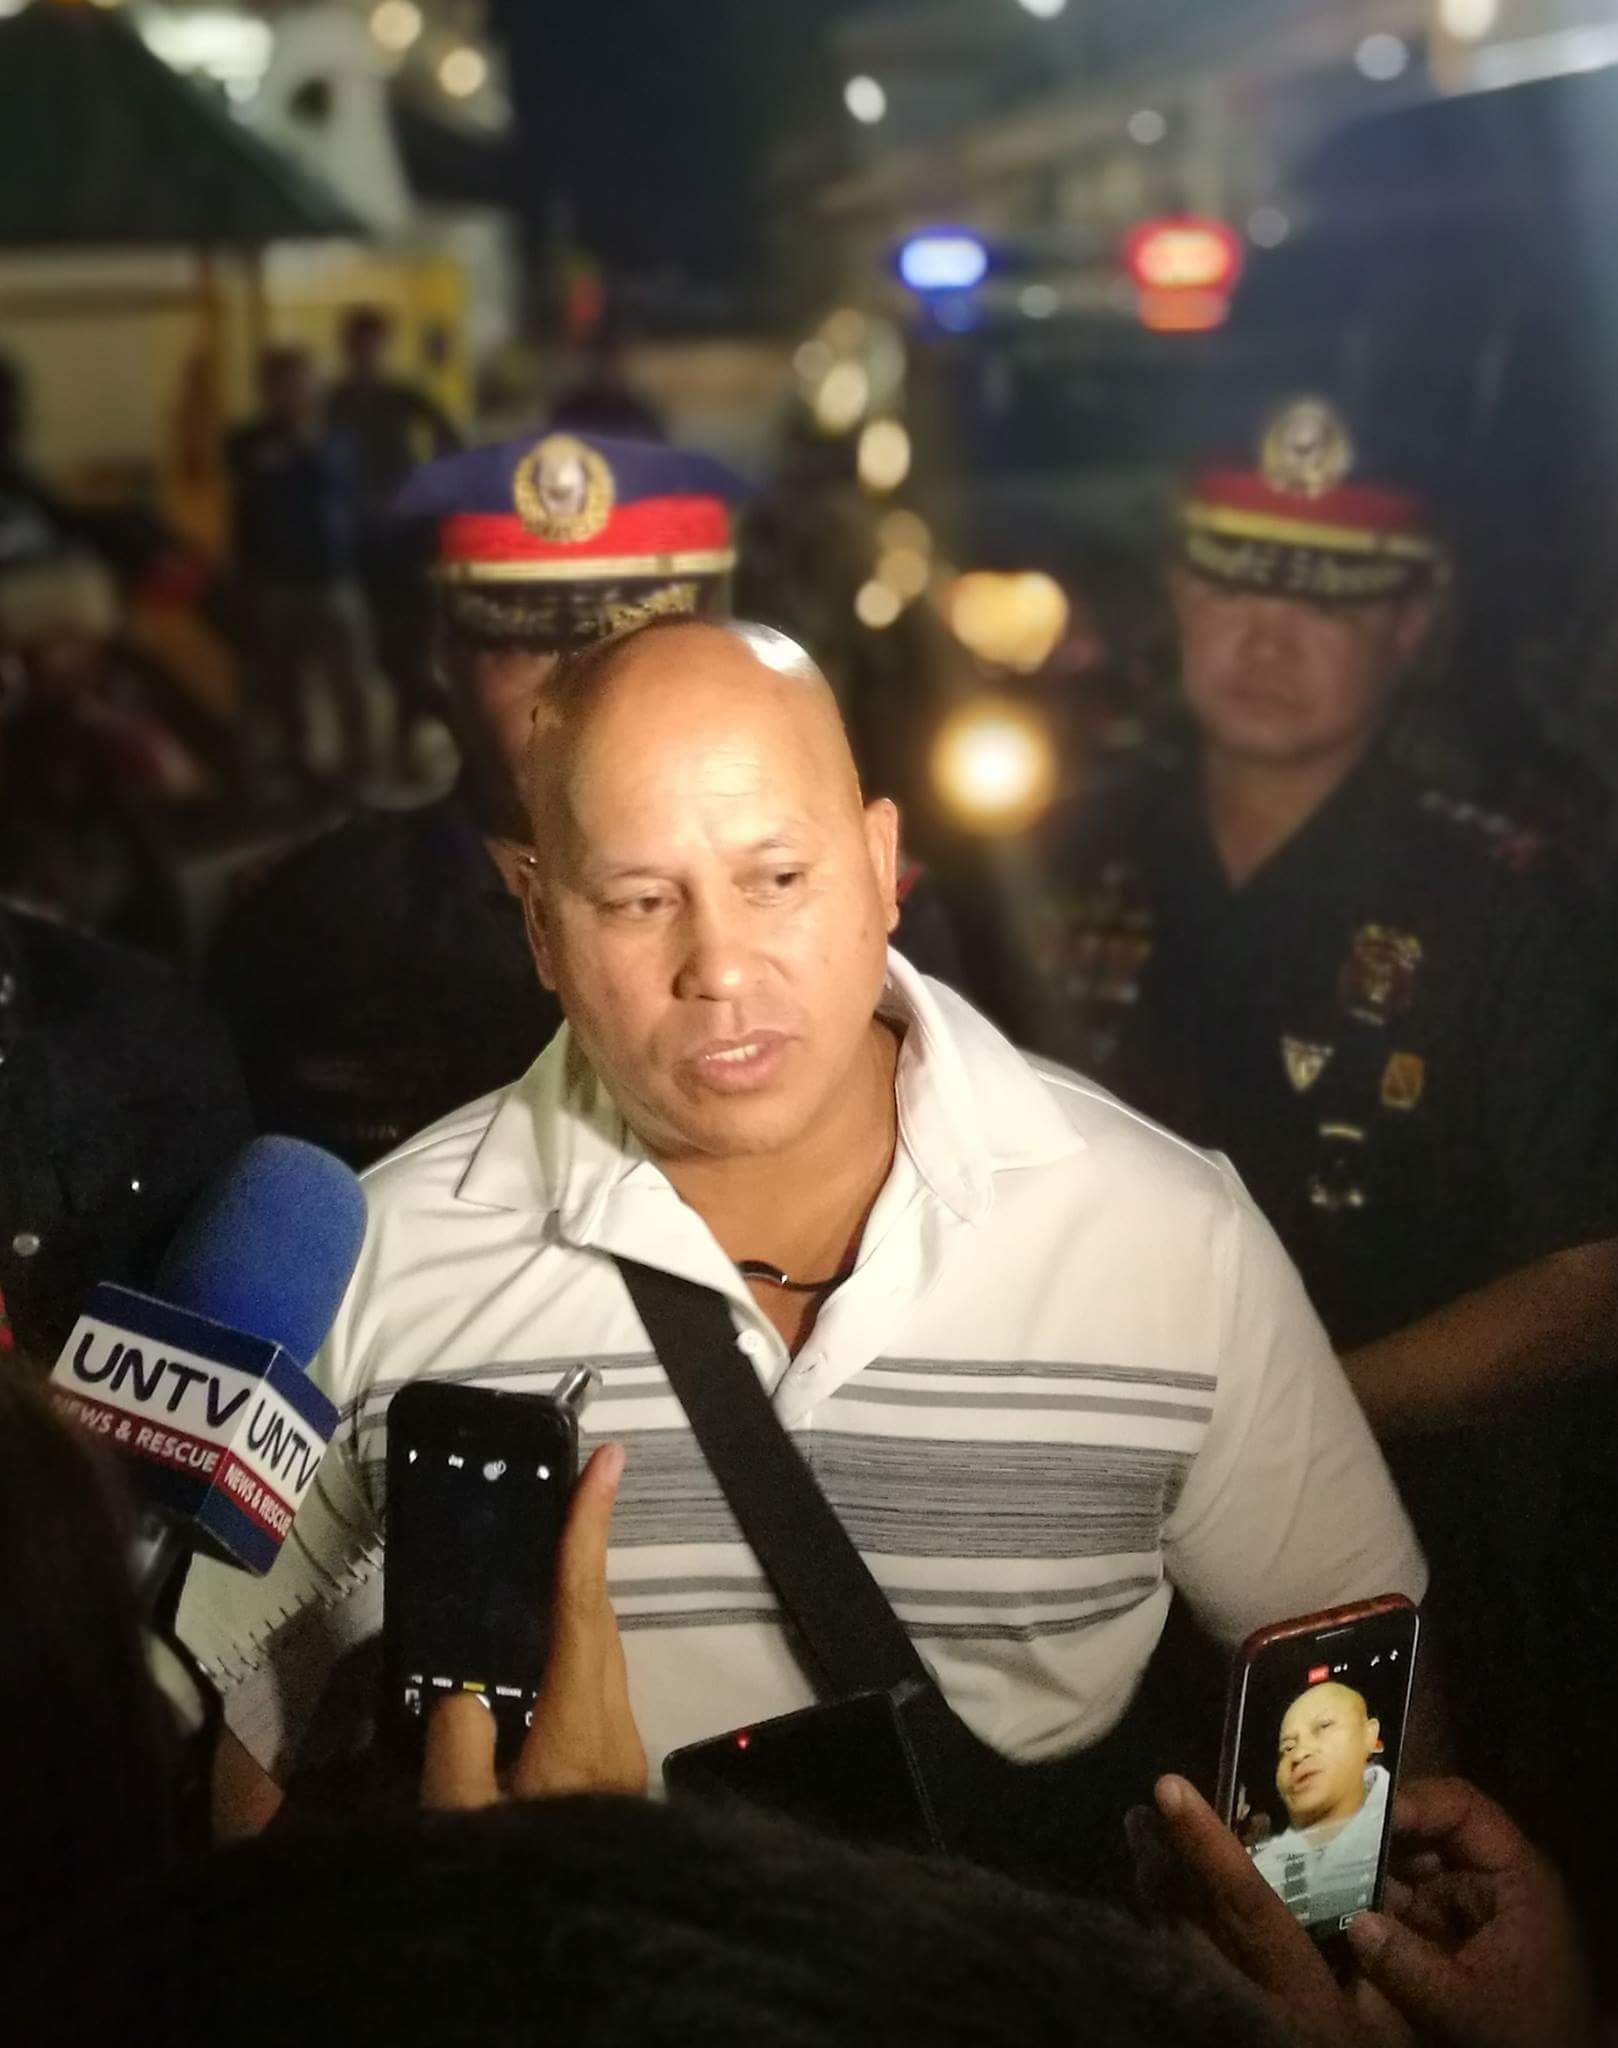 PNP Chief Dir. Gen. Ronald "Bato" Dela Rosa answers questions from the media upon his arrival at the Port of Cebu. (CDN PHOTO/CHRISTIAN MANINGO)